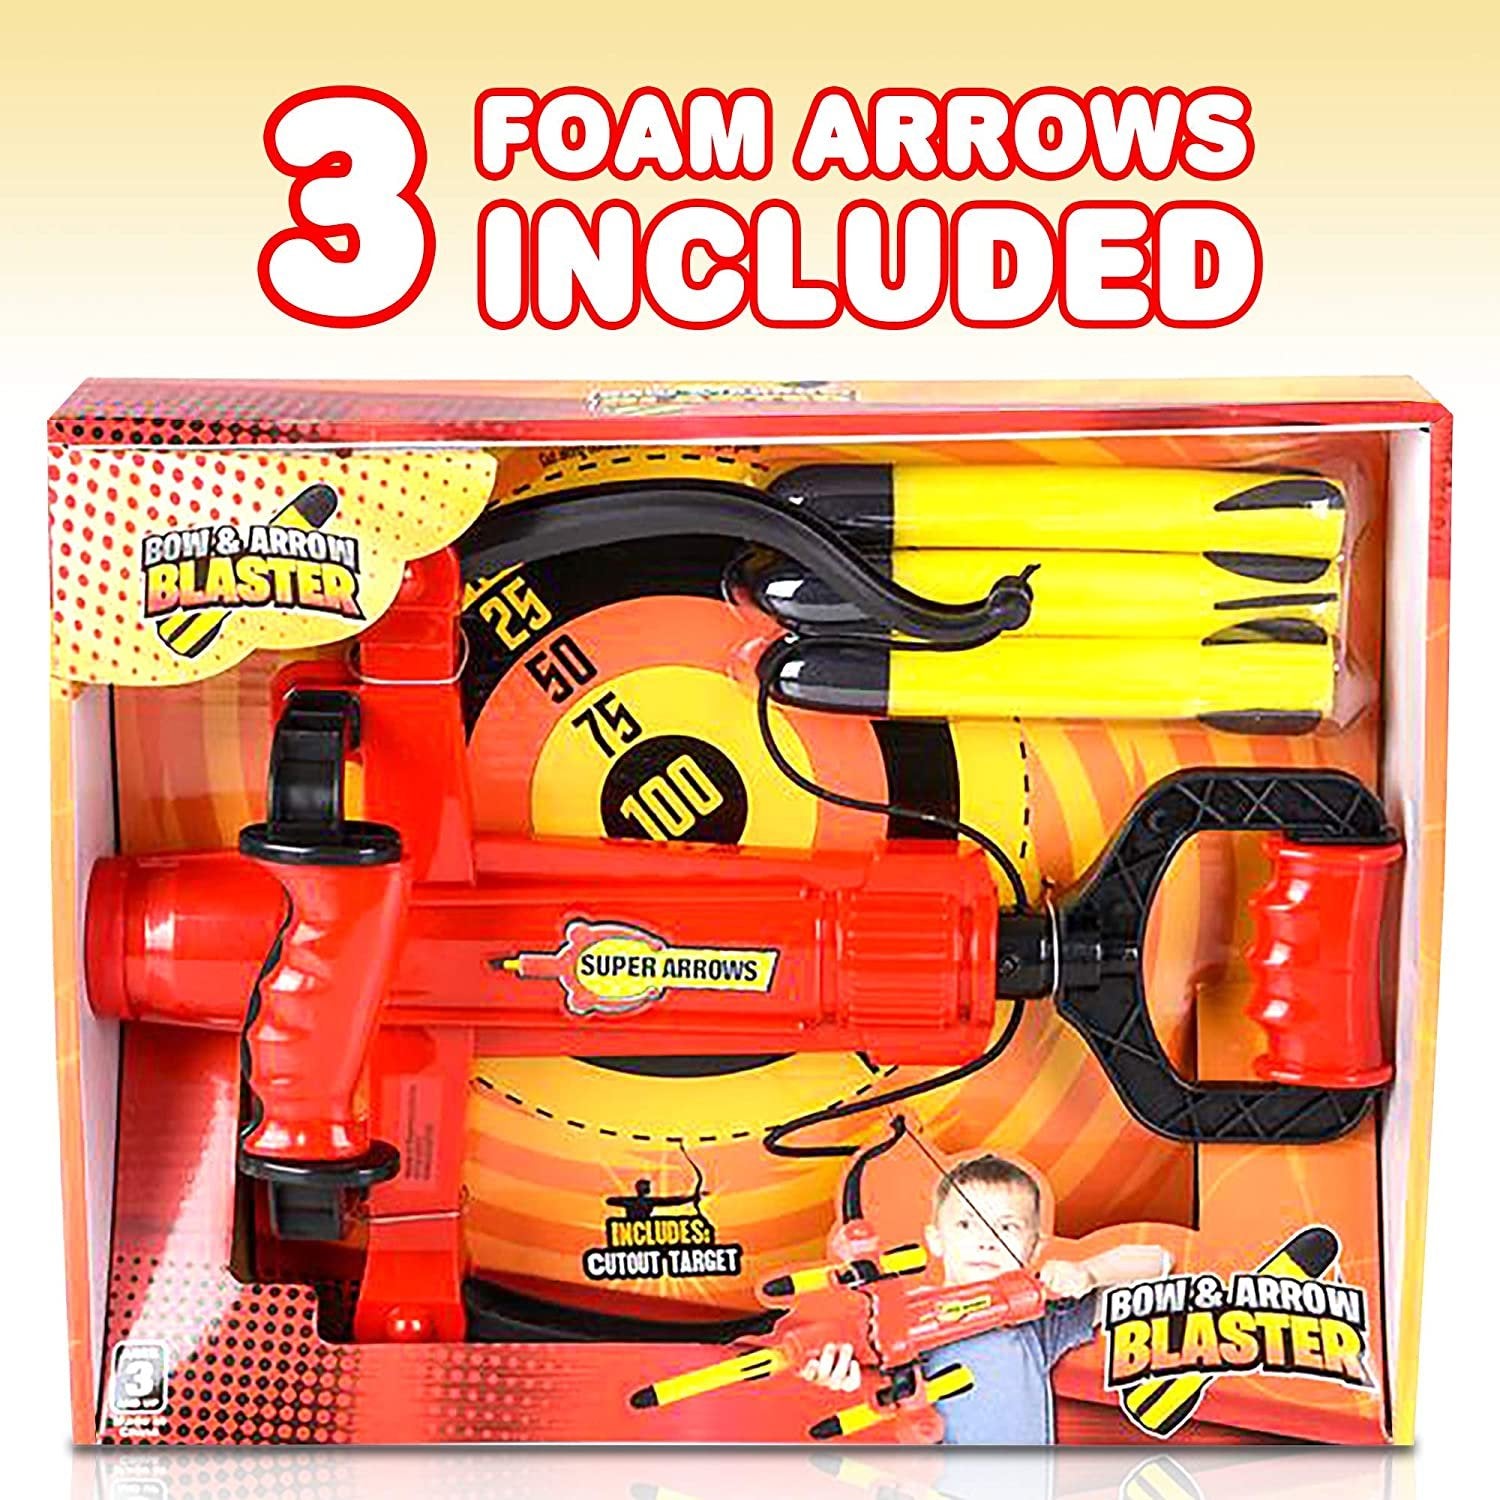 Monstrous Bow and Arrow Set – 12"es Big - Includes 1 Bow and 3 Foam Arrows - Slingshot Toy - Amazing Summer Gift from Moms for Kids Ages 3+